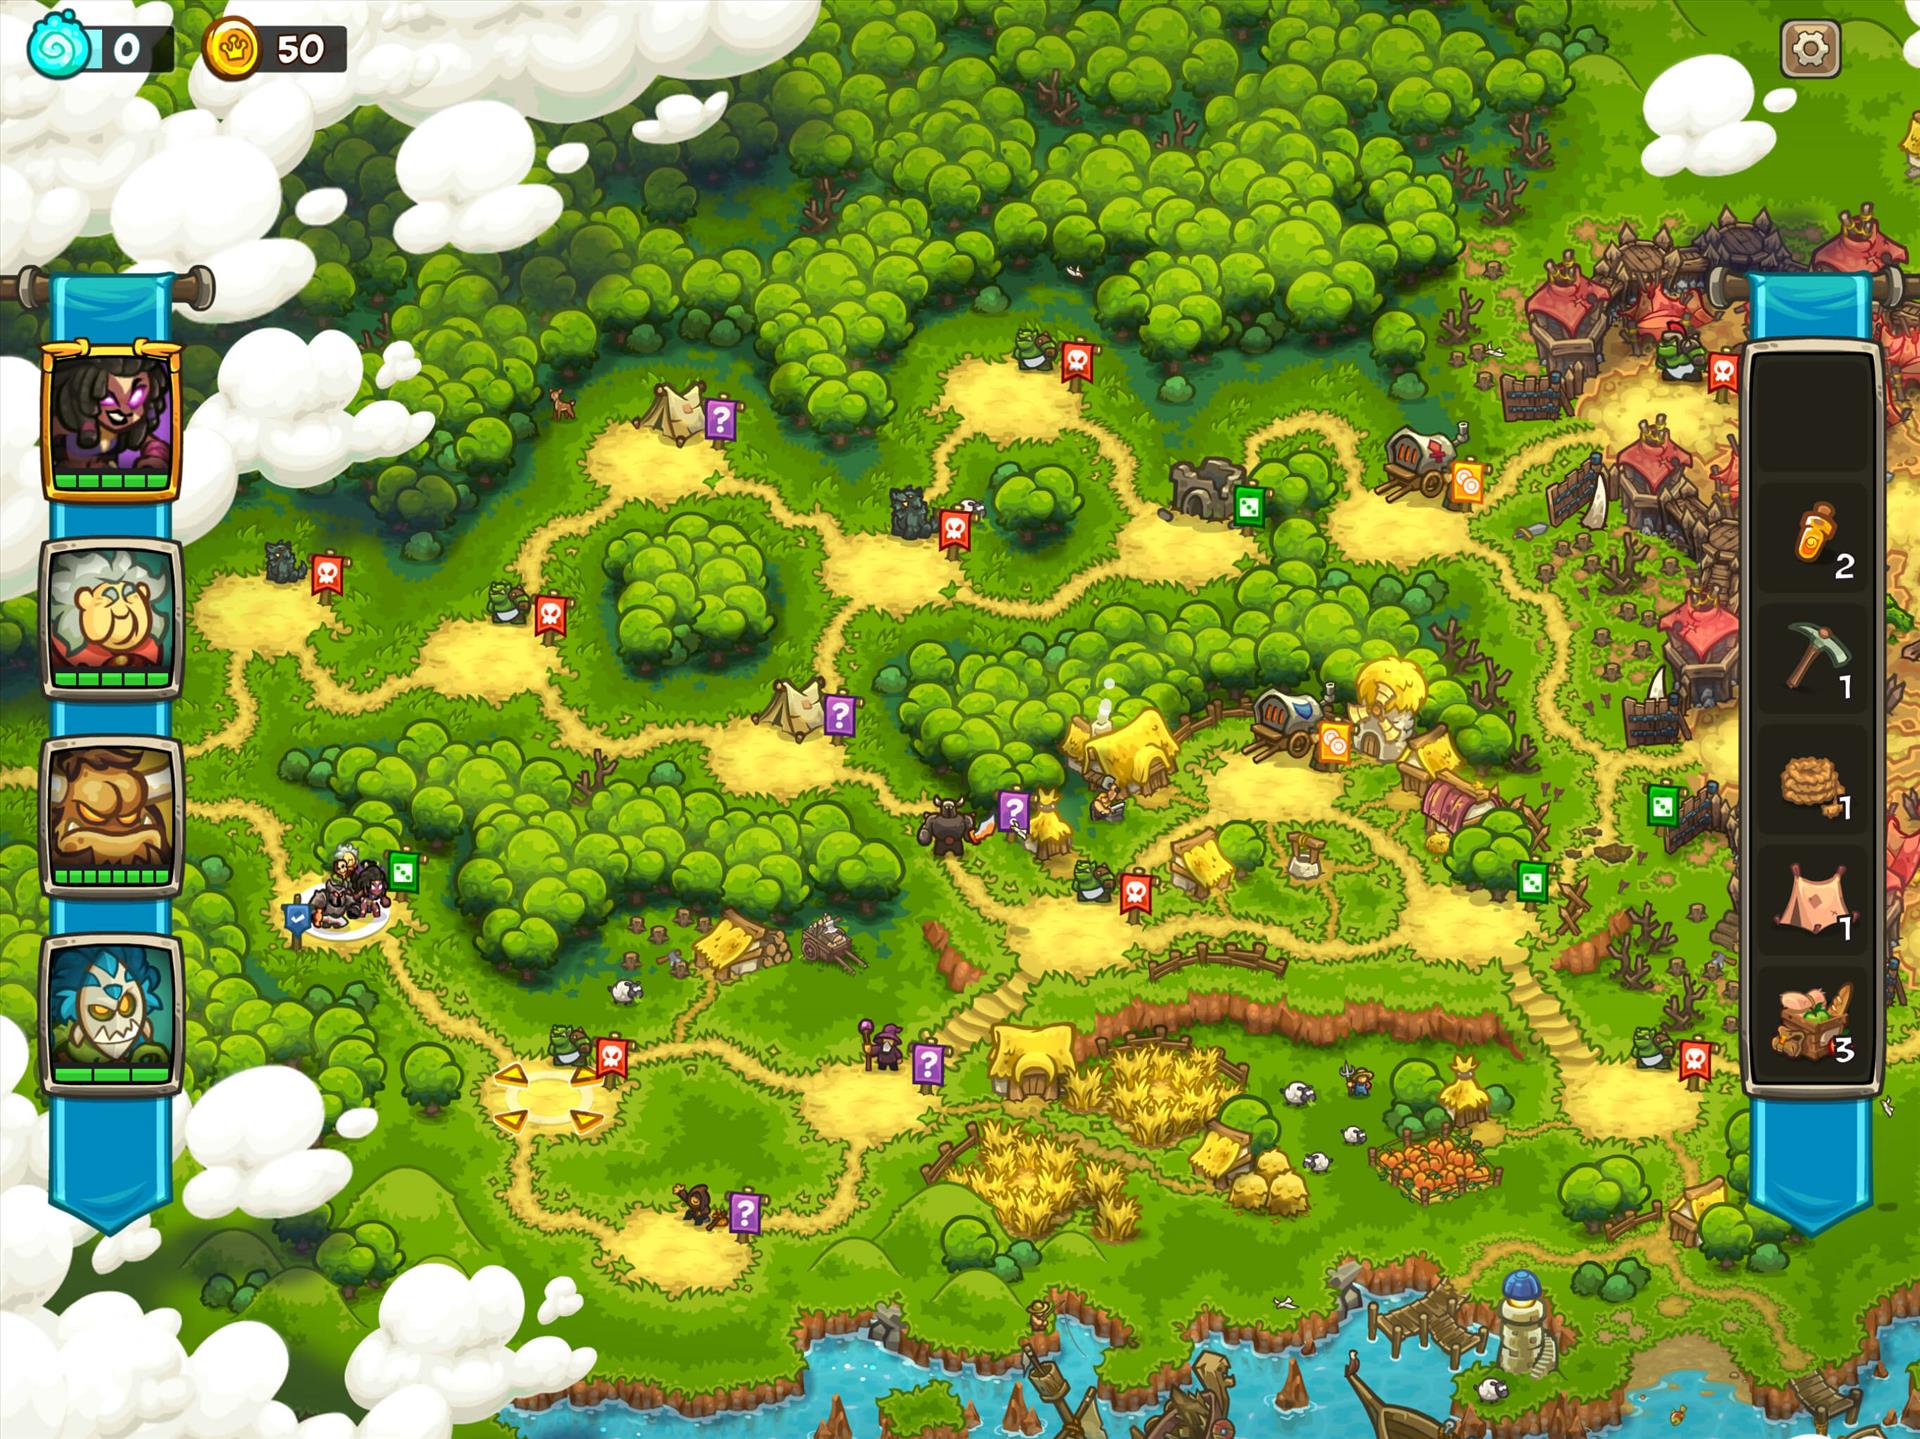 Legends of Kingdom Rush Review - mxdwn Games